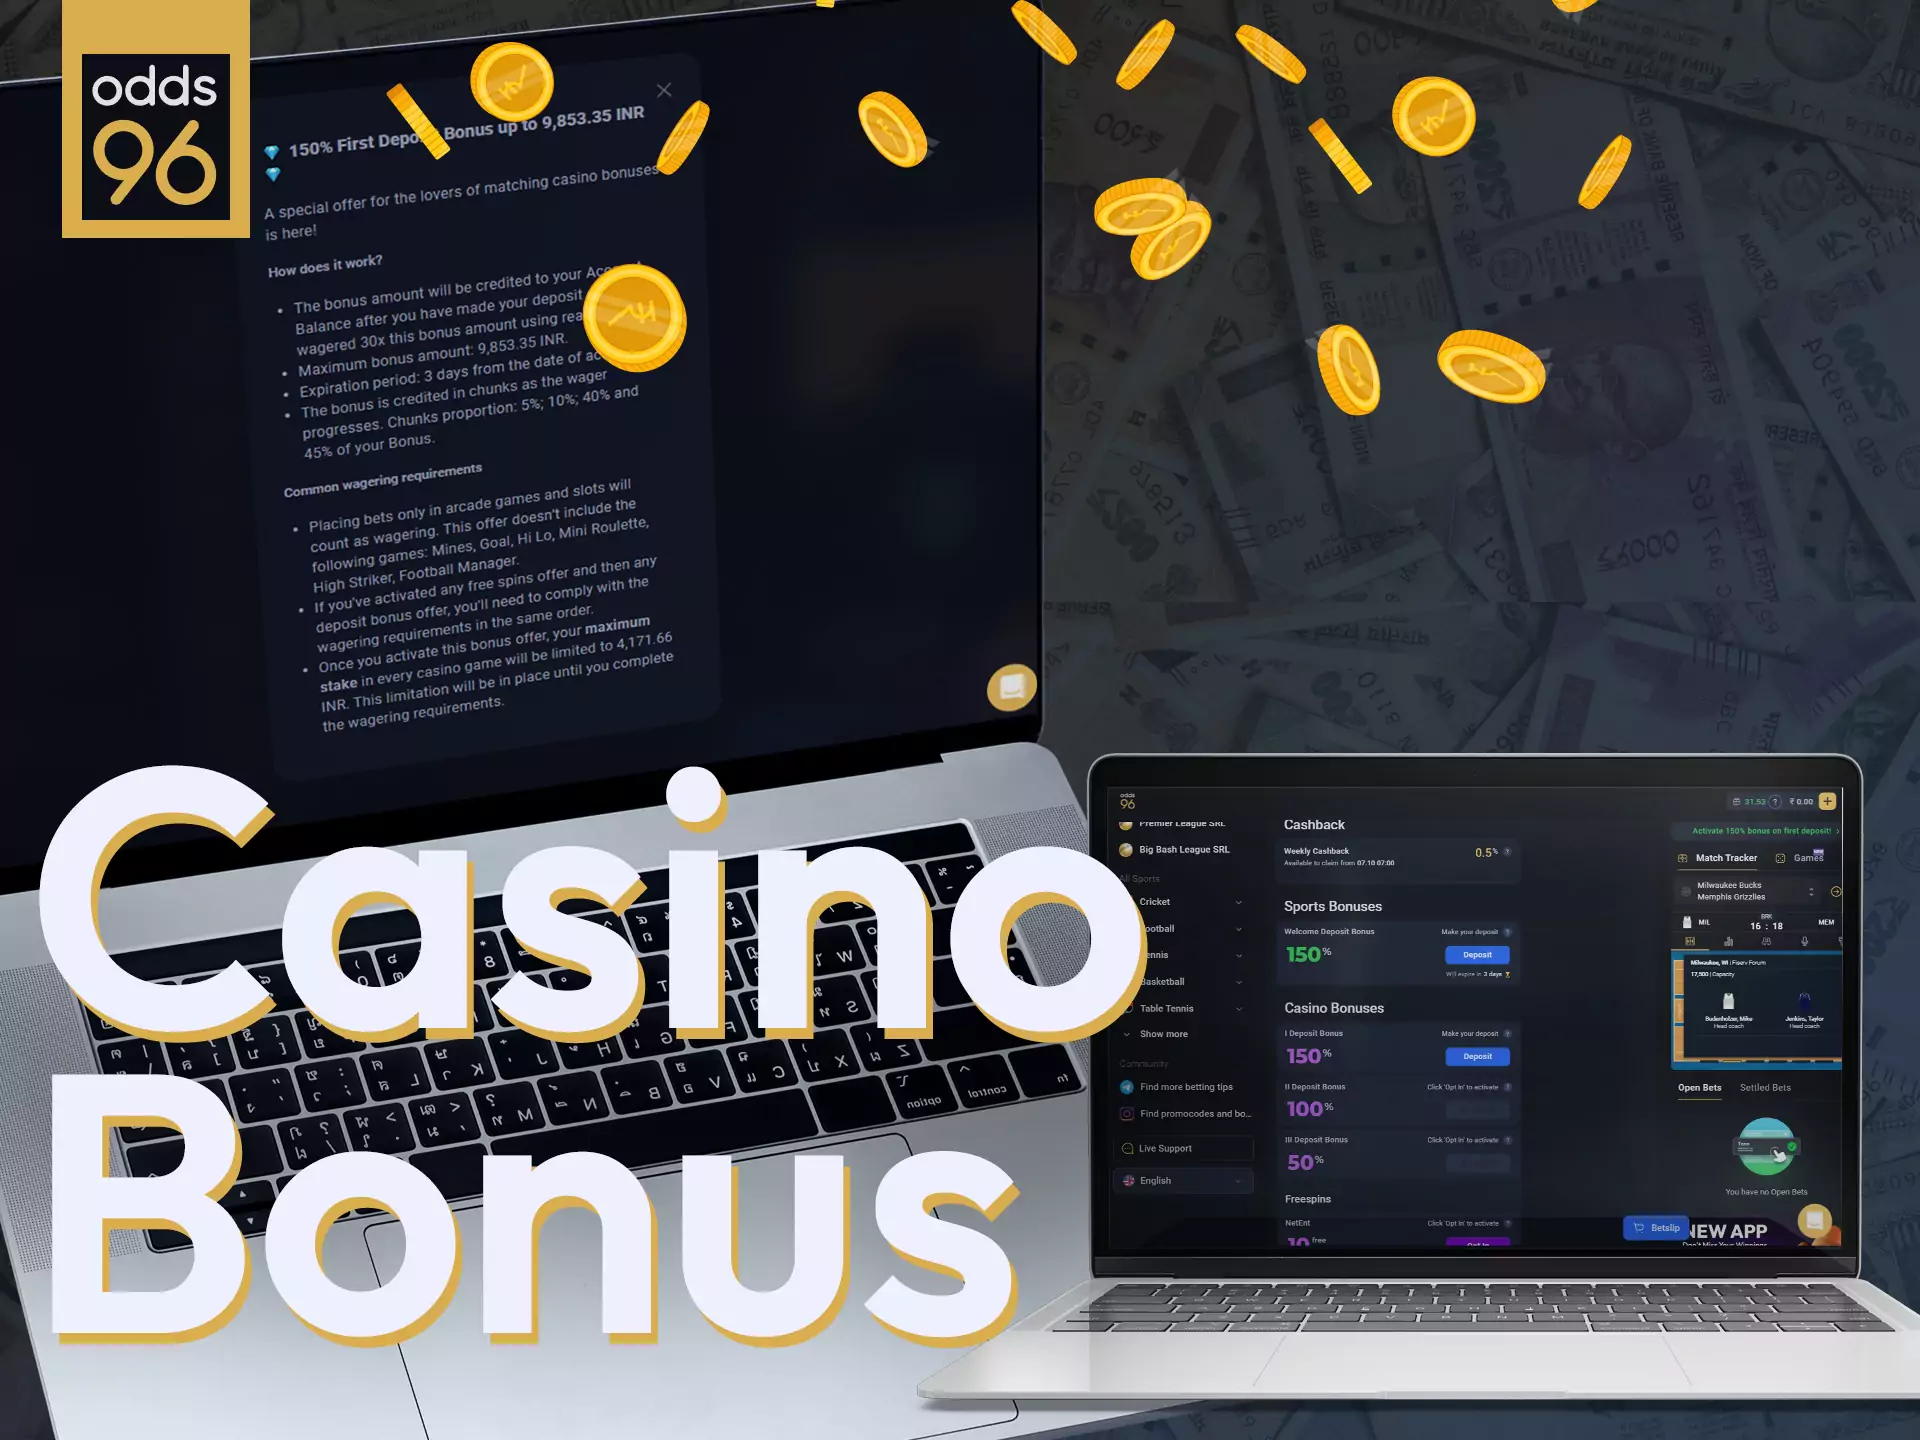 Try all the benefits of the special casino bonus from Odds96.